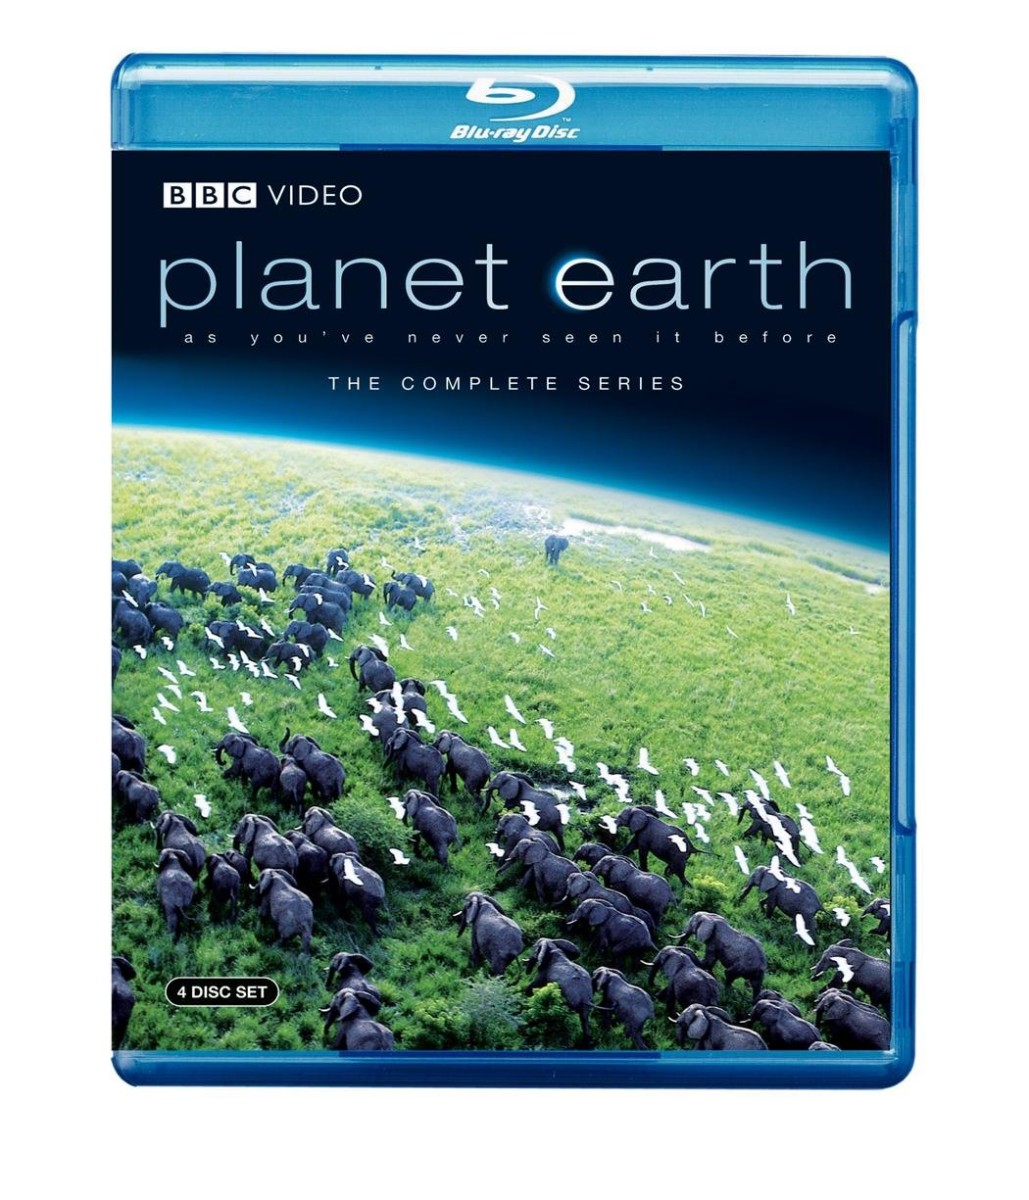 planet-earth-the-complete-series-blu-ray-hot-price